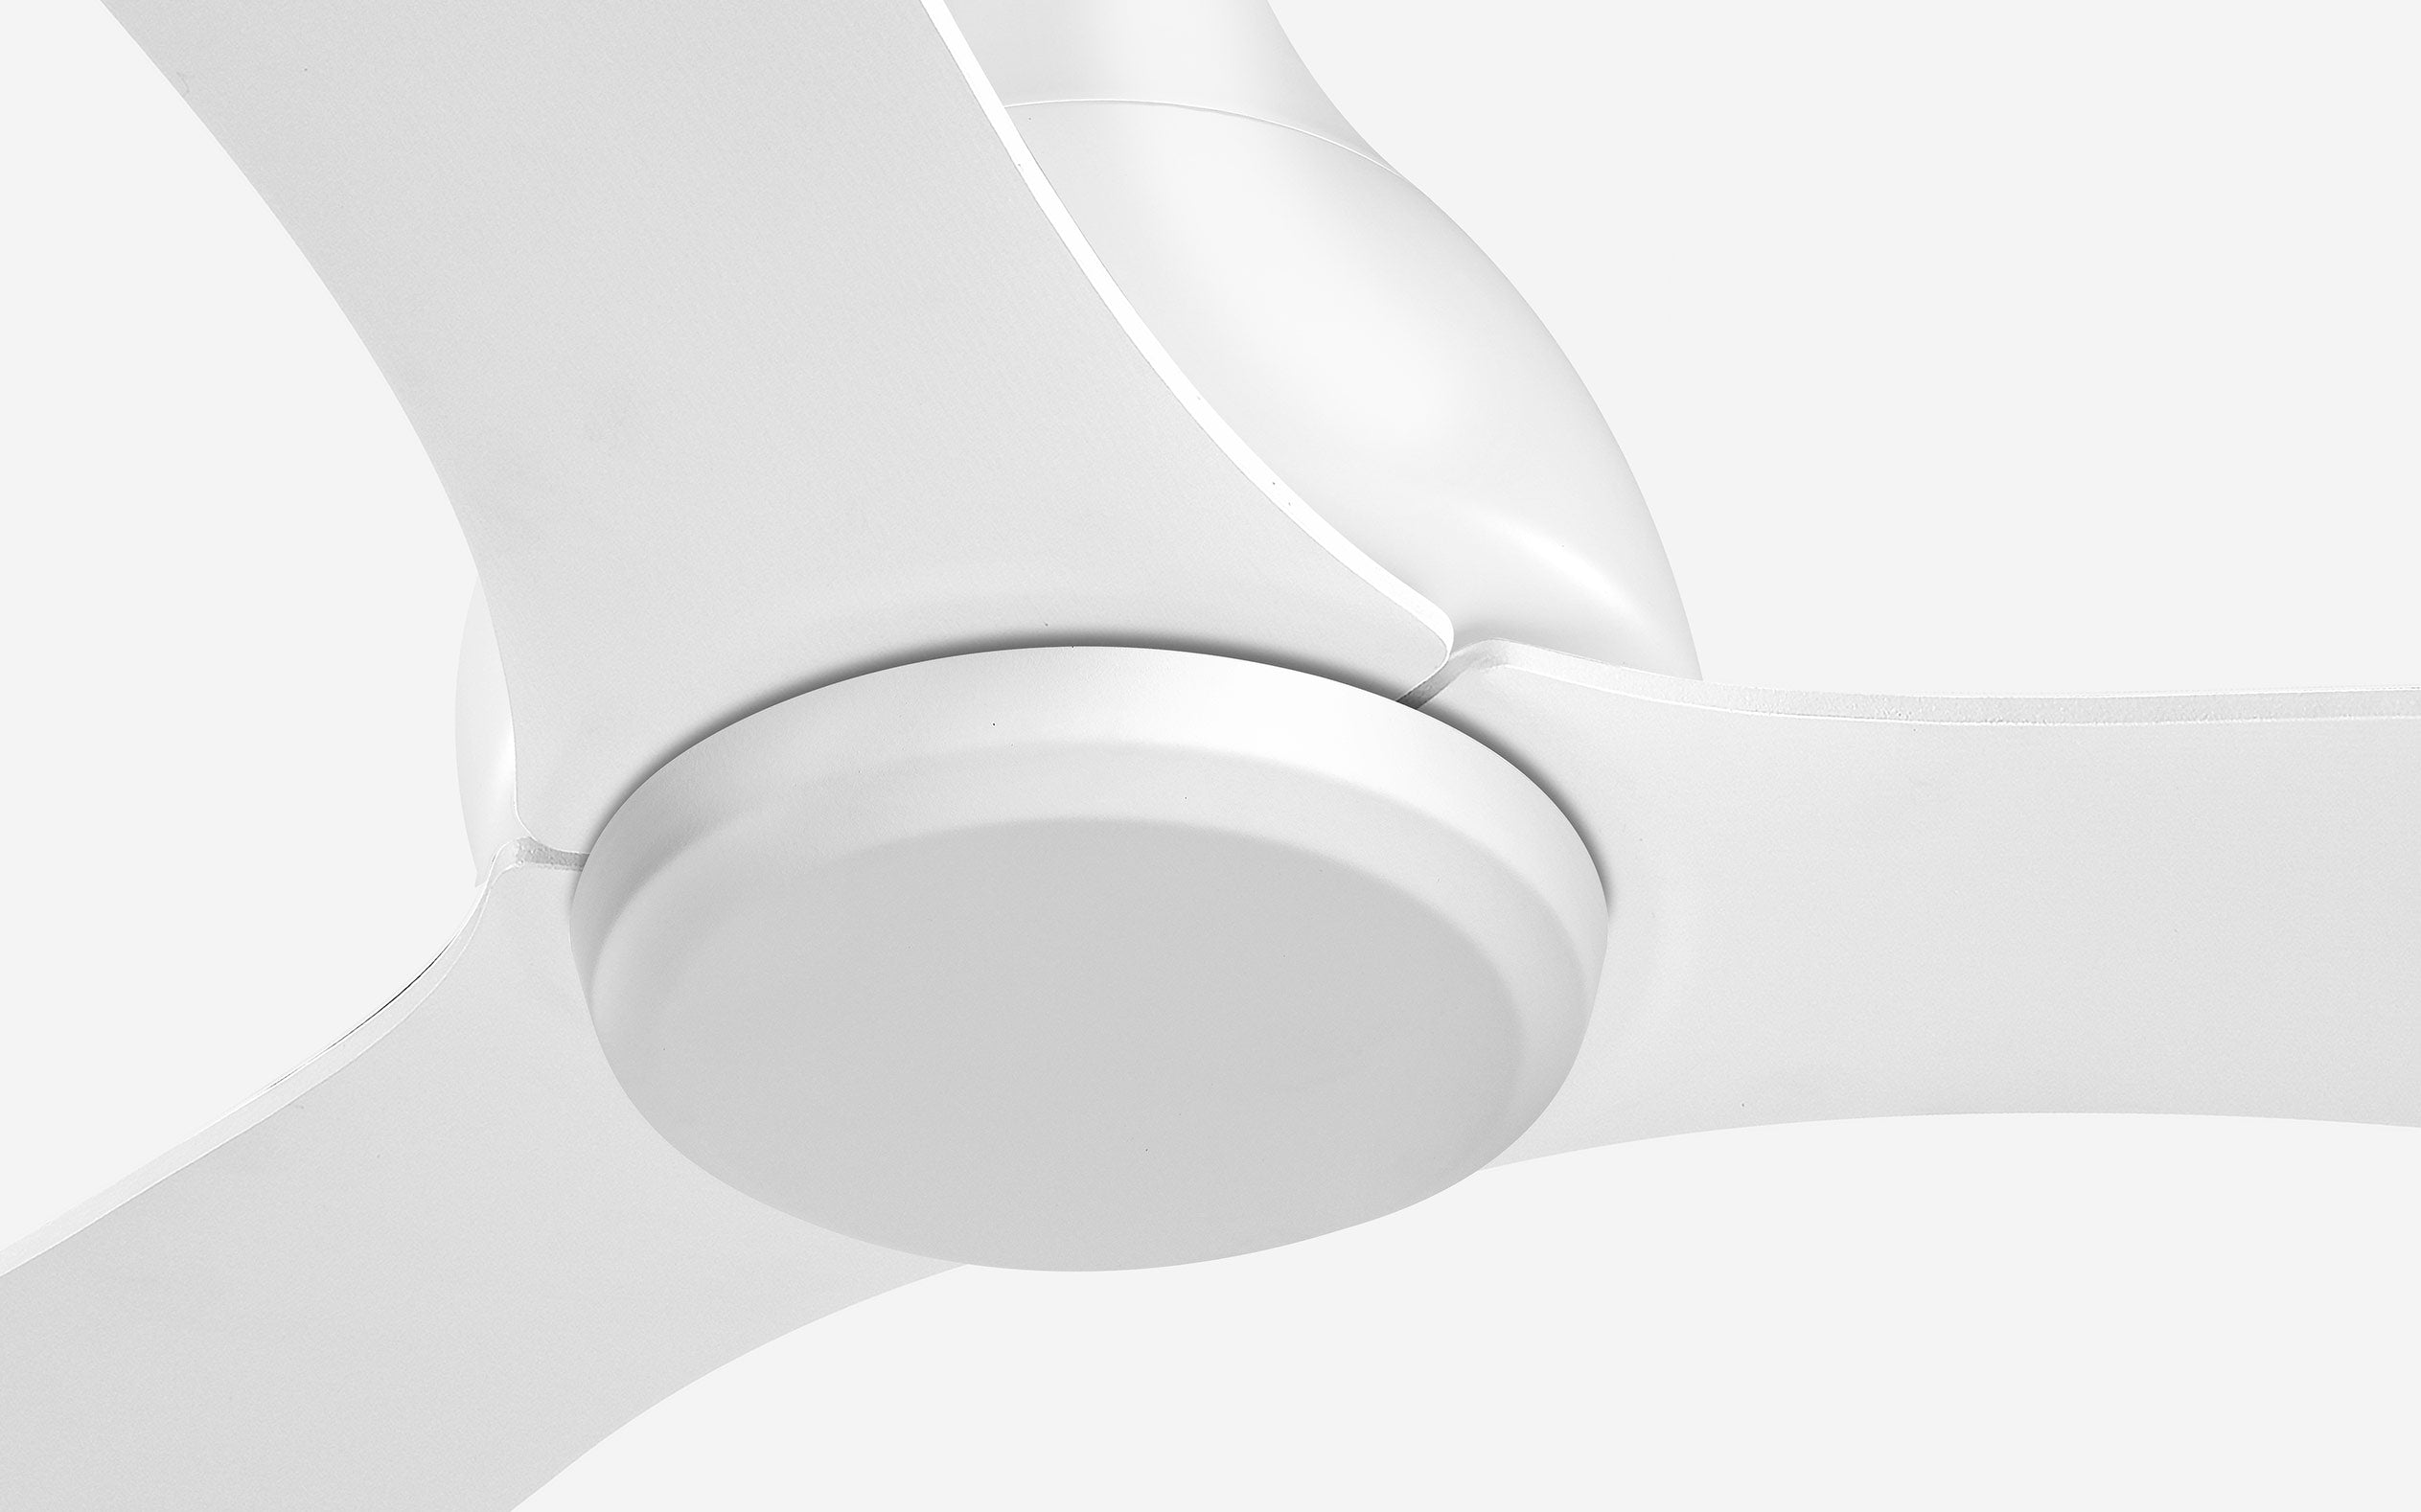 Opal Storm Ceiling Fan - #Body Color_White|Blade Color_White|Blade Size_42"